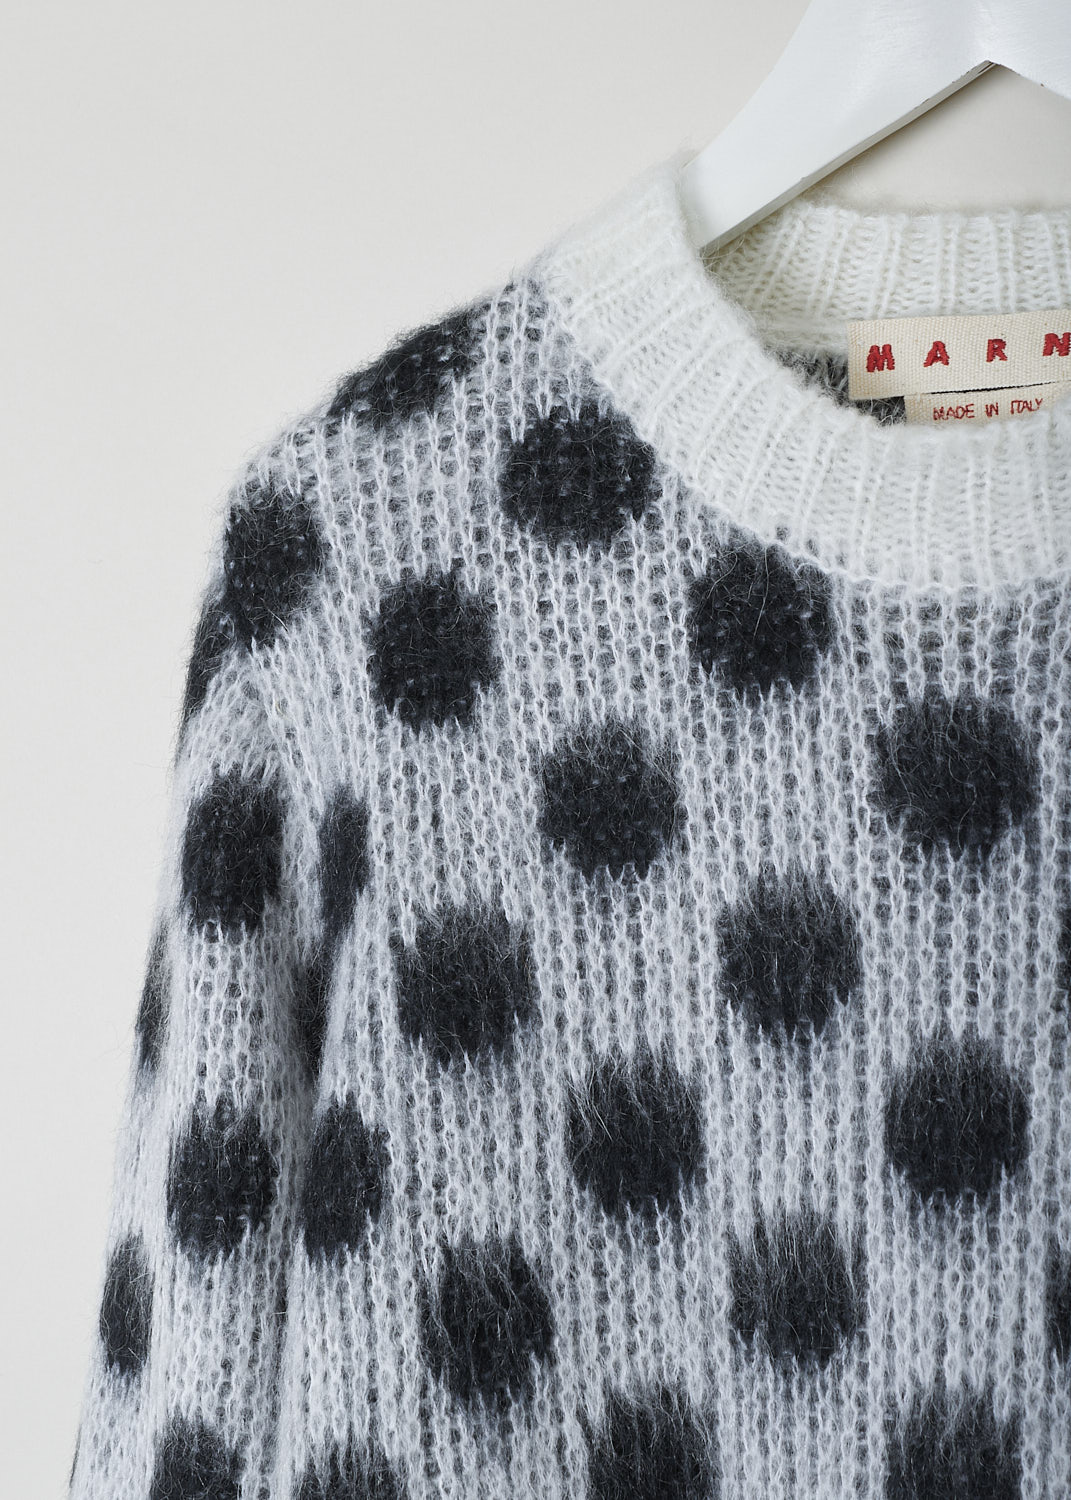 MARNI, BRUSHED DOTS FUZZY WUZZY SWEATER, GCMMD0476Q0_UFU160_DOW0, Grey, Print, Black, Detail, This brushed dots Fuzzy Wuzzy crew neck sweater has a white neckline with a ribbed finish. That same white ribbed finish can be found on the cuffs and hemline. The sweater has a two-tone dot pattern in grey and black.
